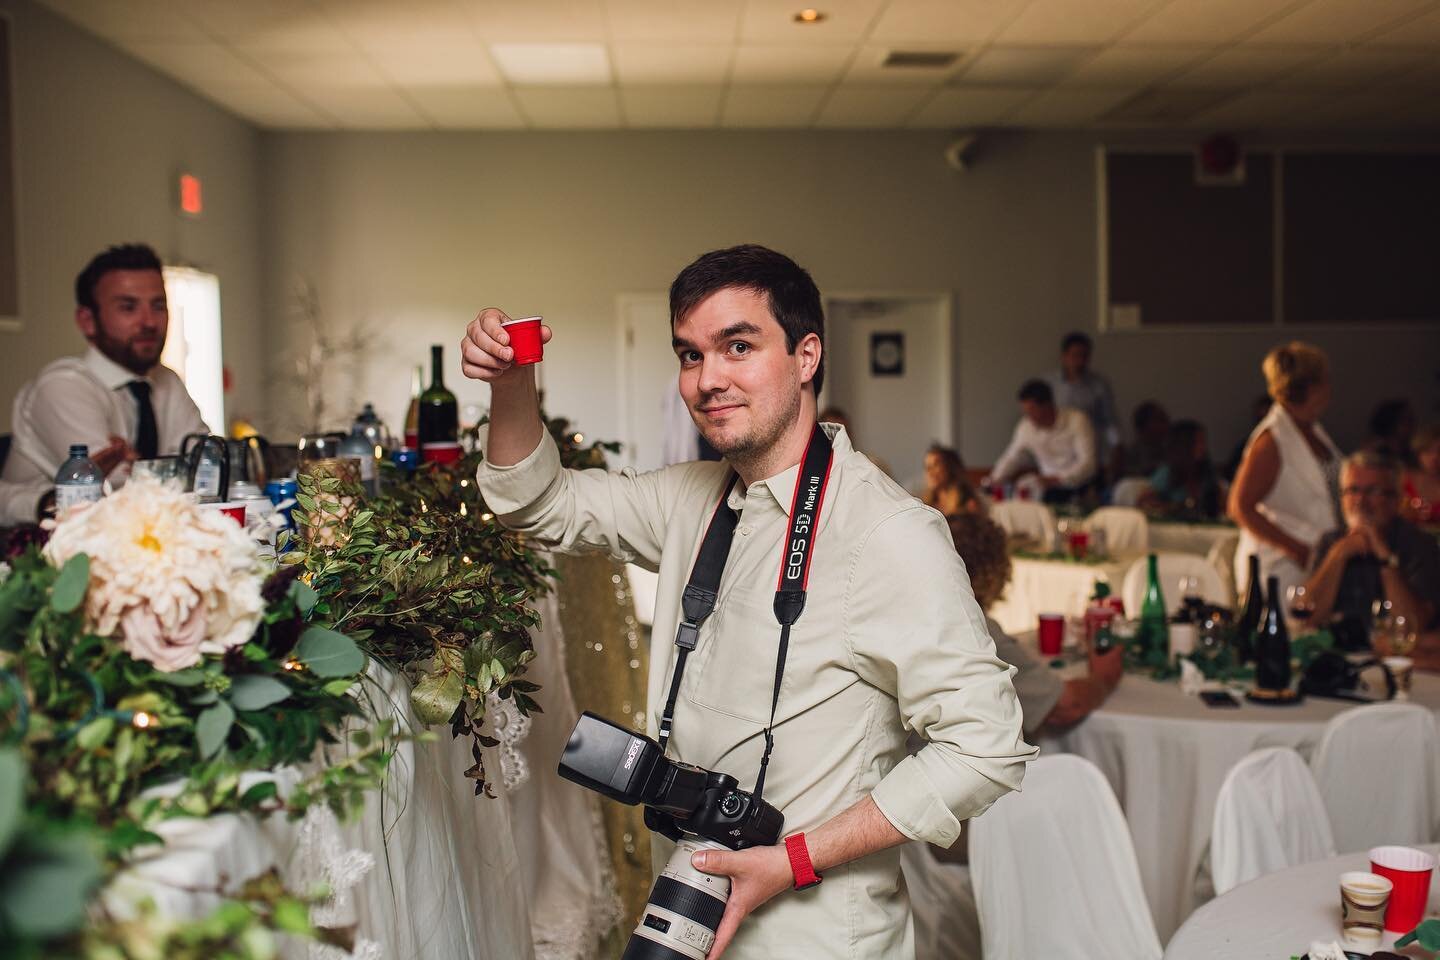 We are generally quite professional when shooting, but when the bride and groom insist&hellip;. #yolo #dopeoplestilluseyolo #yegphotographer #weddings #photographerscanbefuntoo #canon #behindthescenes #alberta #fireball